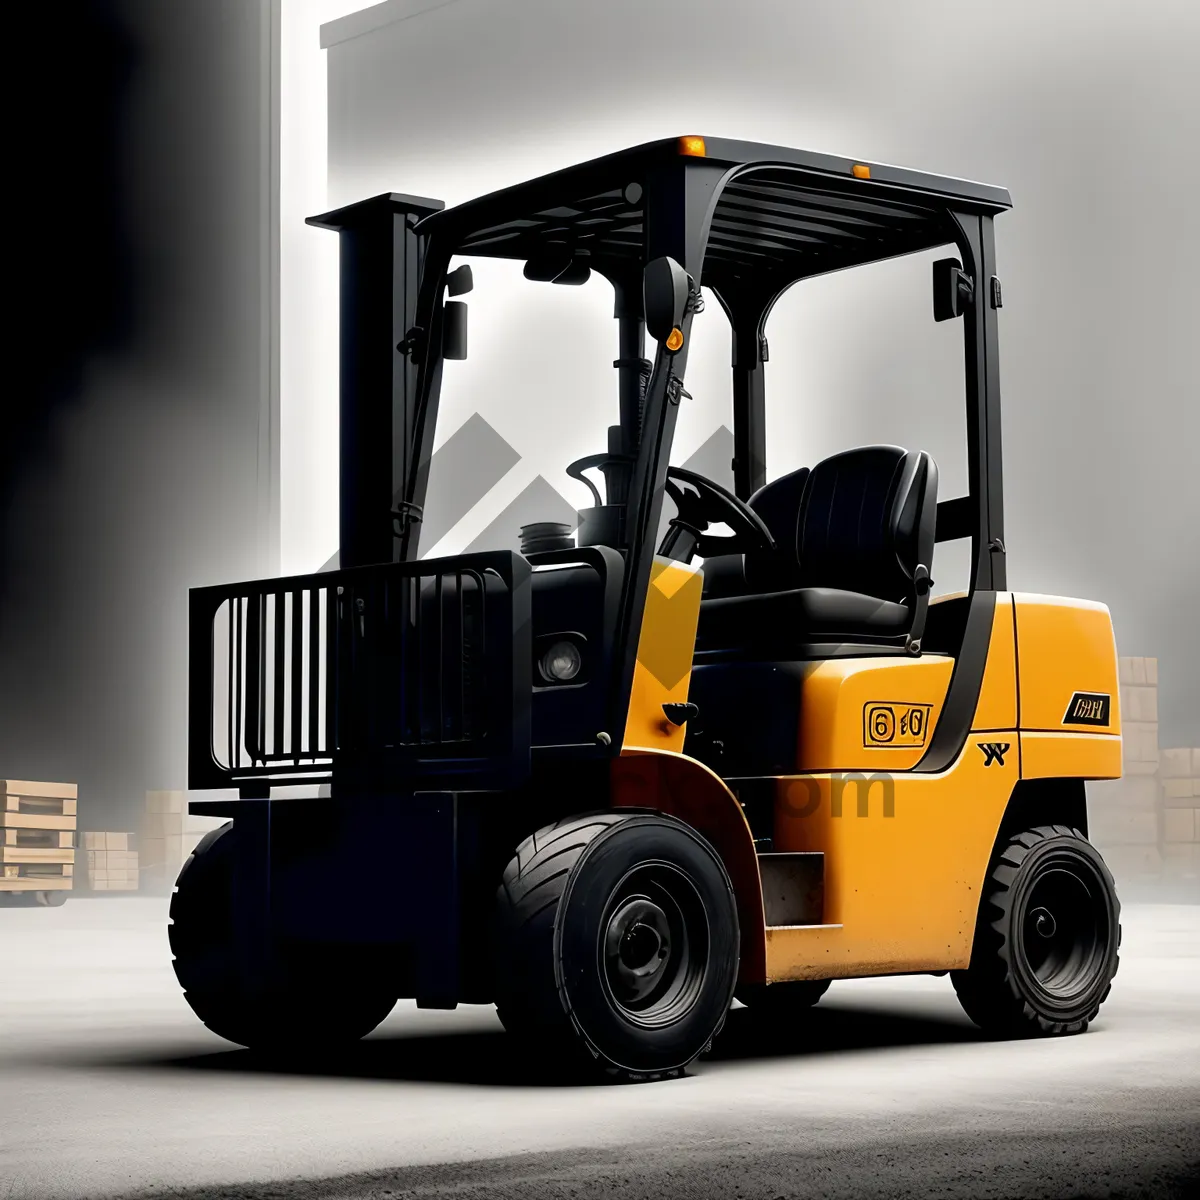 Picture of Heavy-duty Forklift Truck at Work